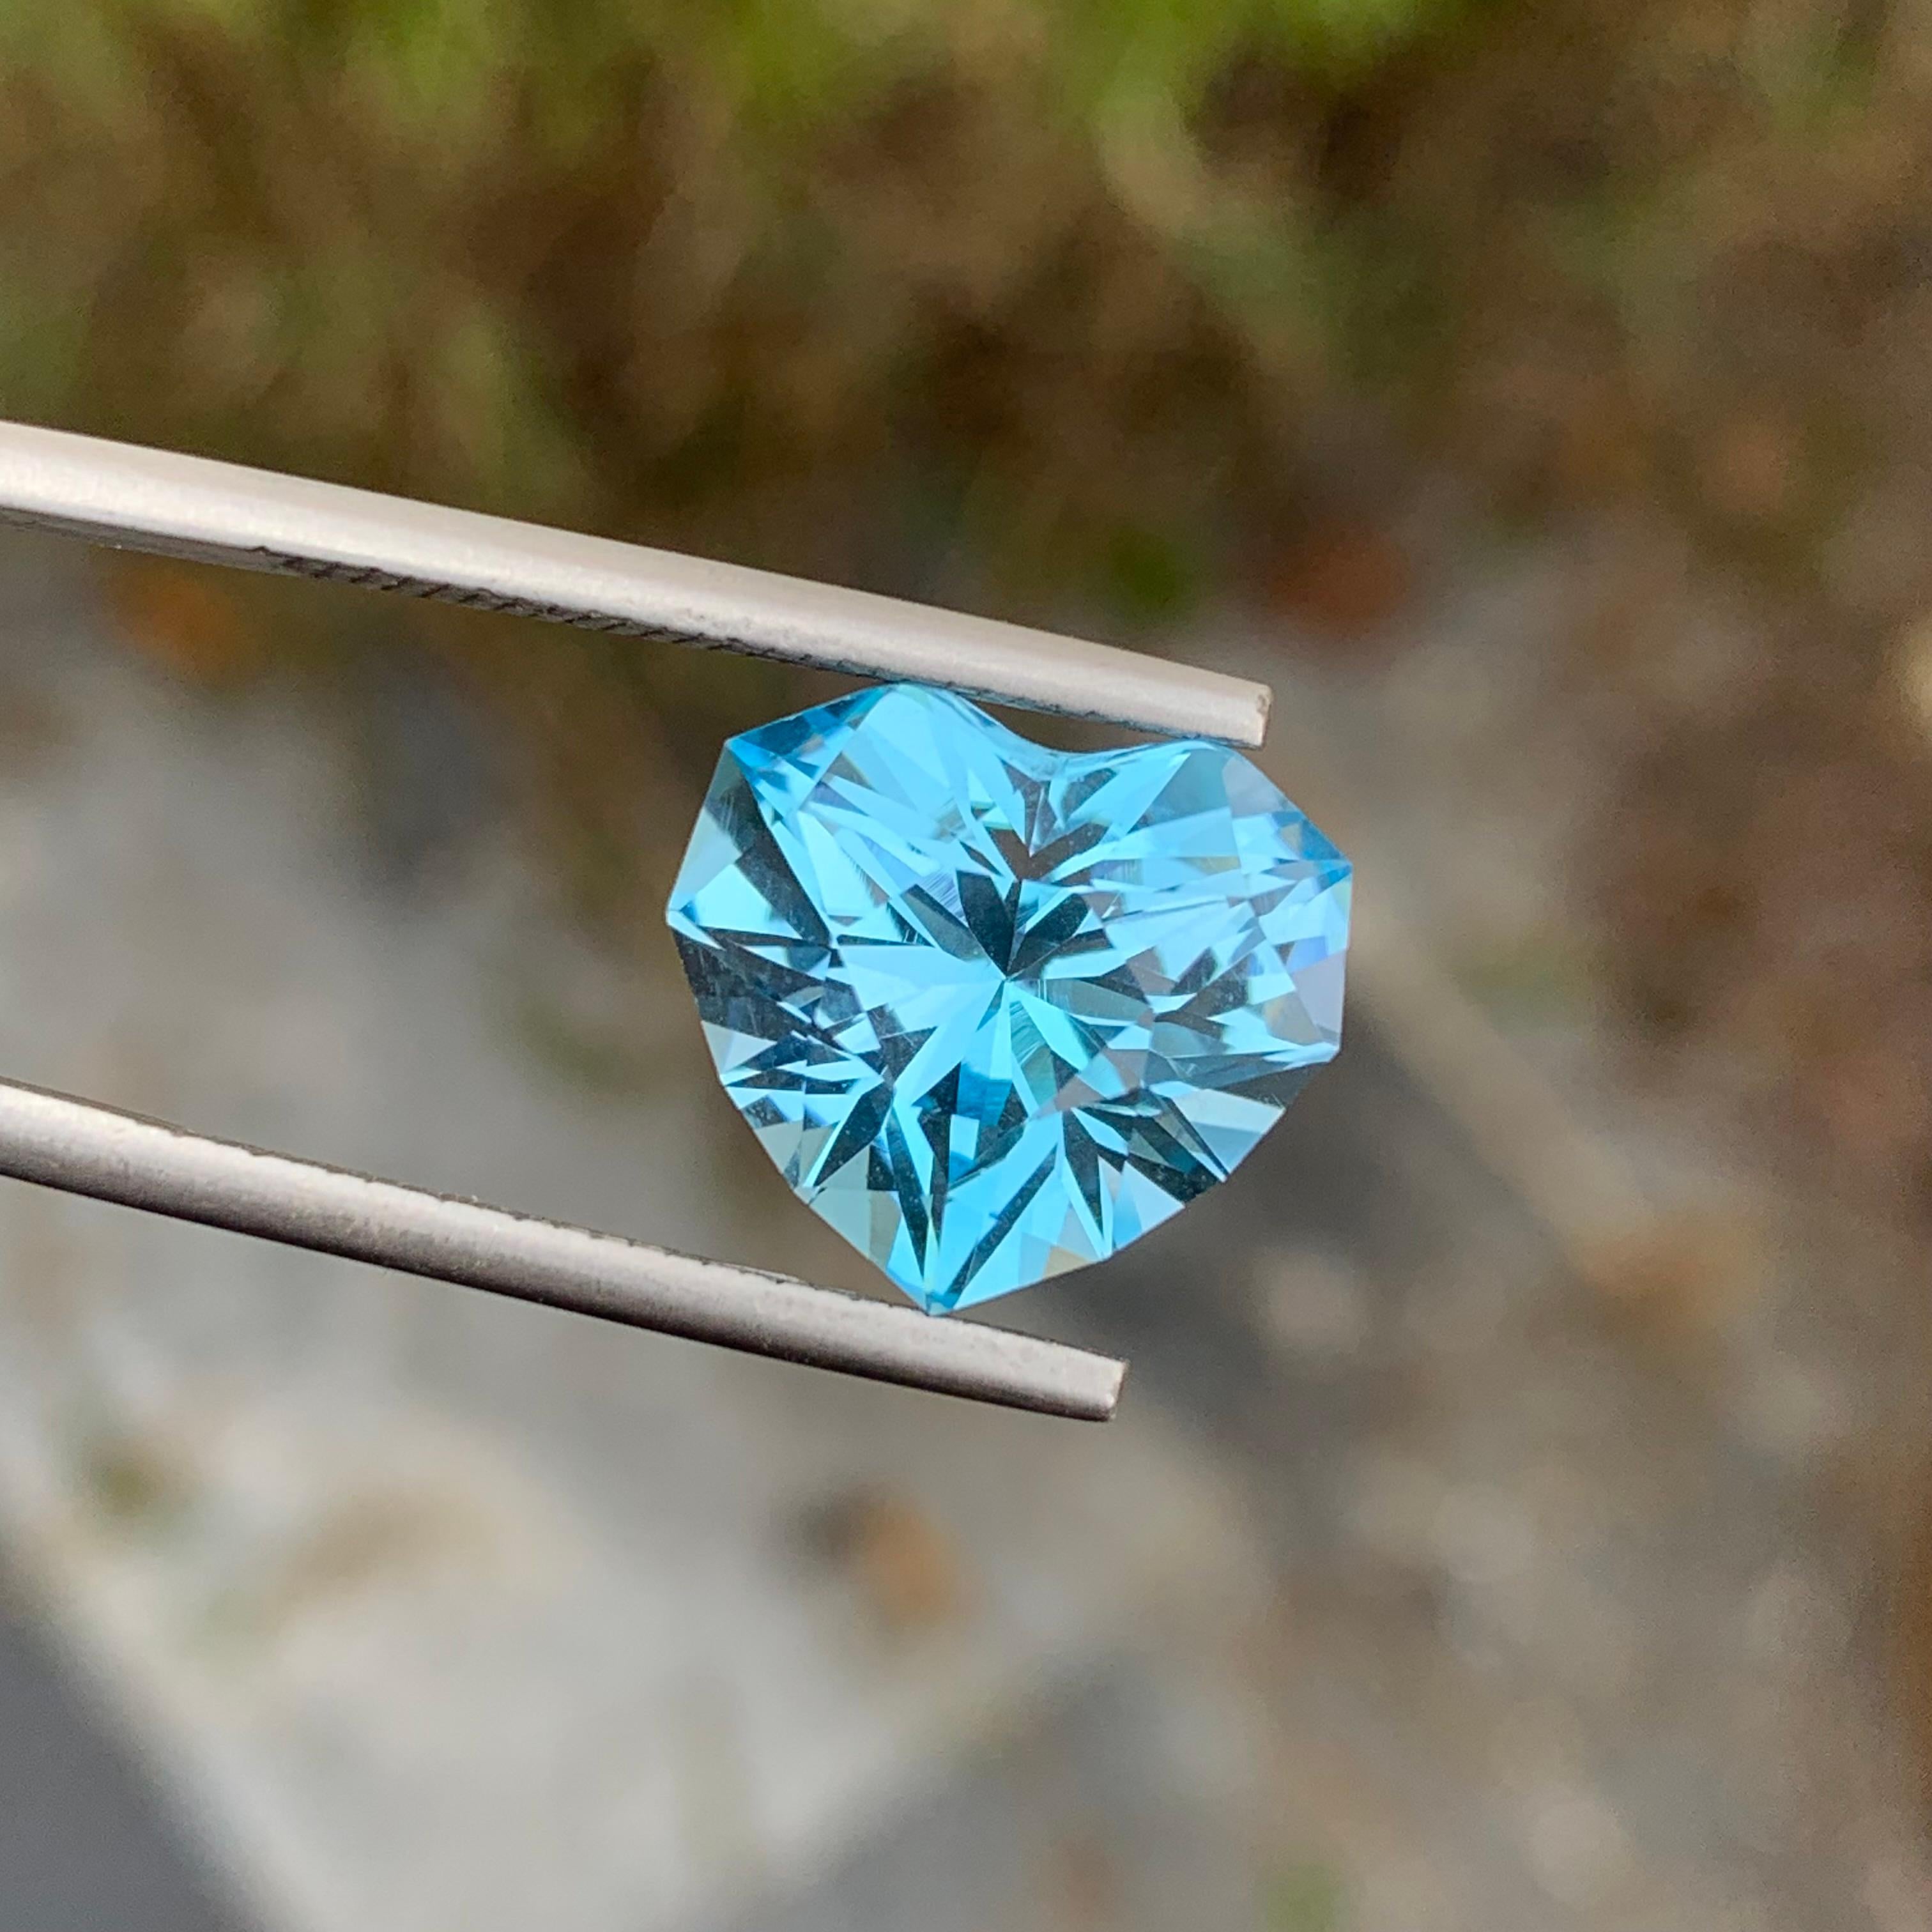 Loose Blue Topaz
Weight: 10.70 Carats
Dimension: 12.4 x 13.7 x 9.5 Mm
Origin: Brazil
Colour: Blue
Certificate: On Demand
Shape: Heart 

Blue topaz is a stunning gemstone prized for its vibrant blue color and remarkable clarity. It belongs to the